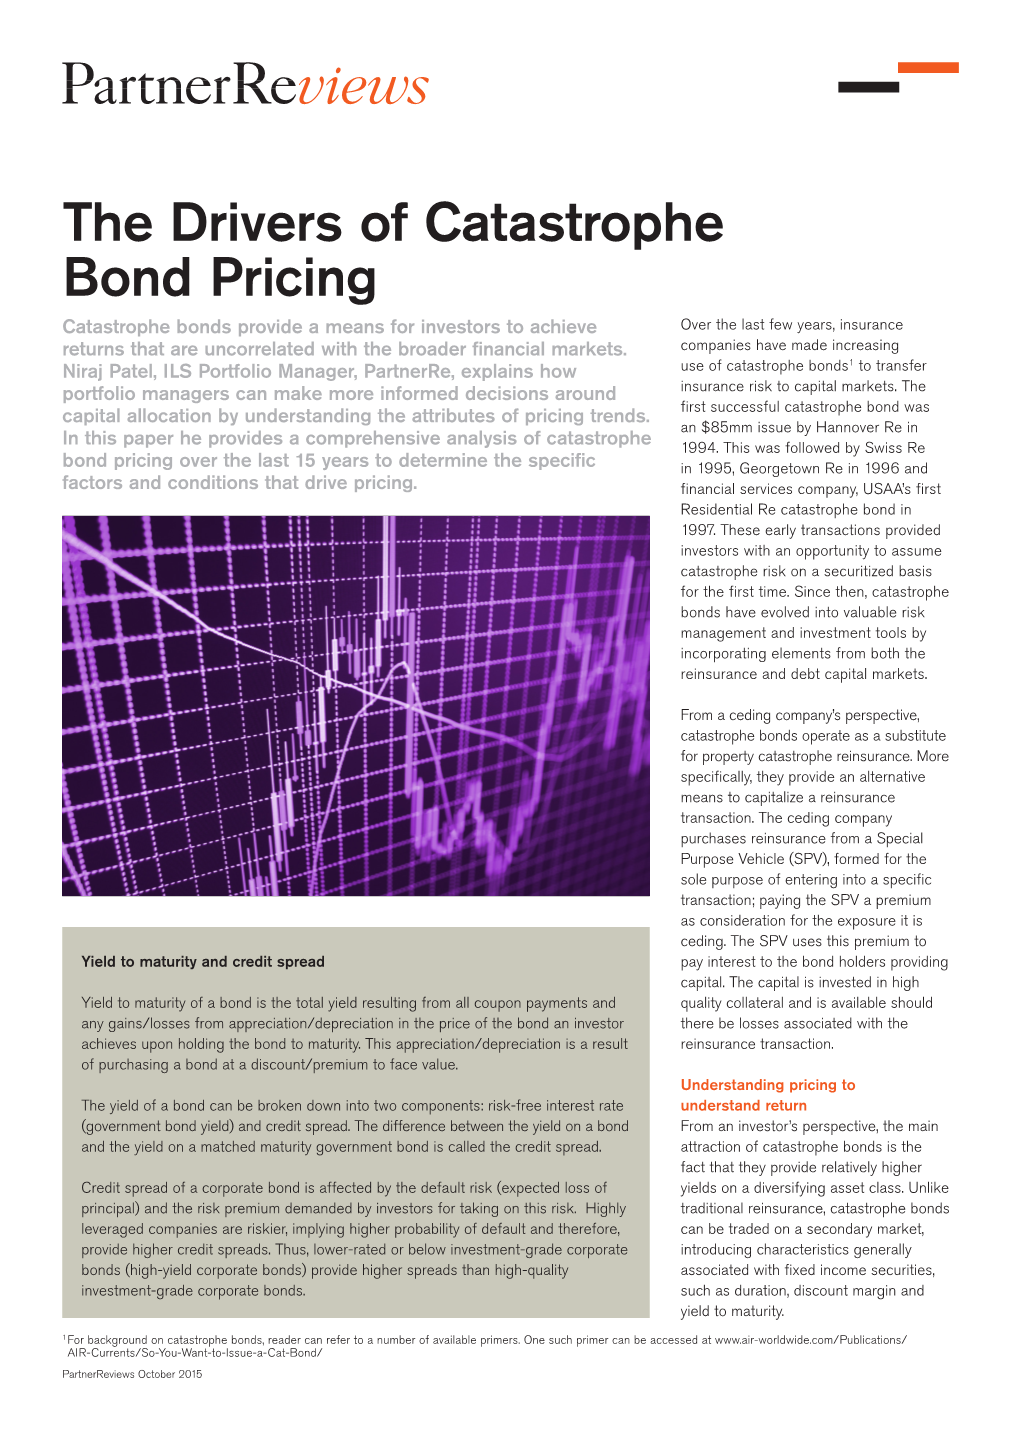 The Drivers of Catastrophe Bond Pricing